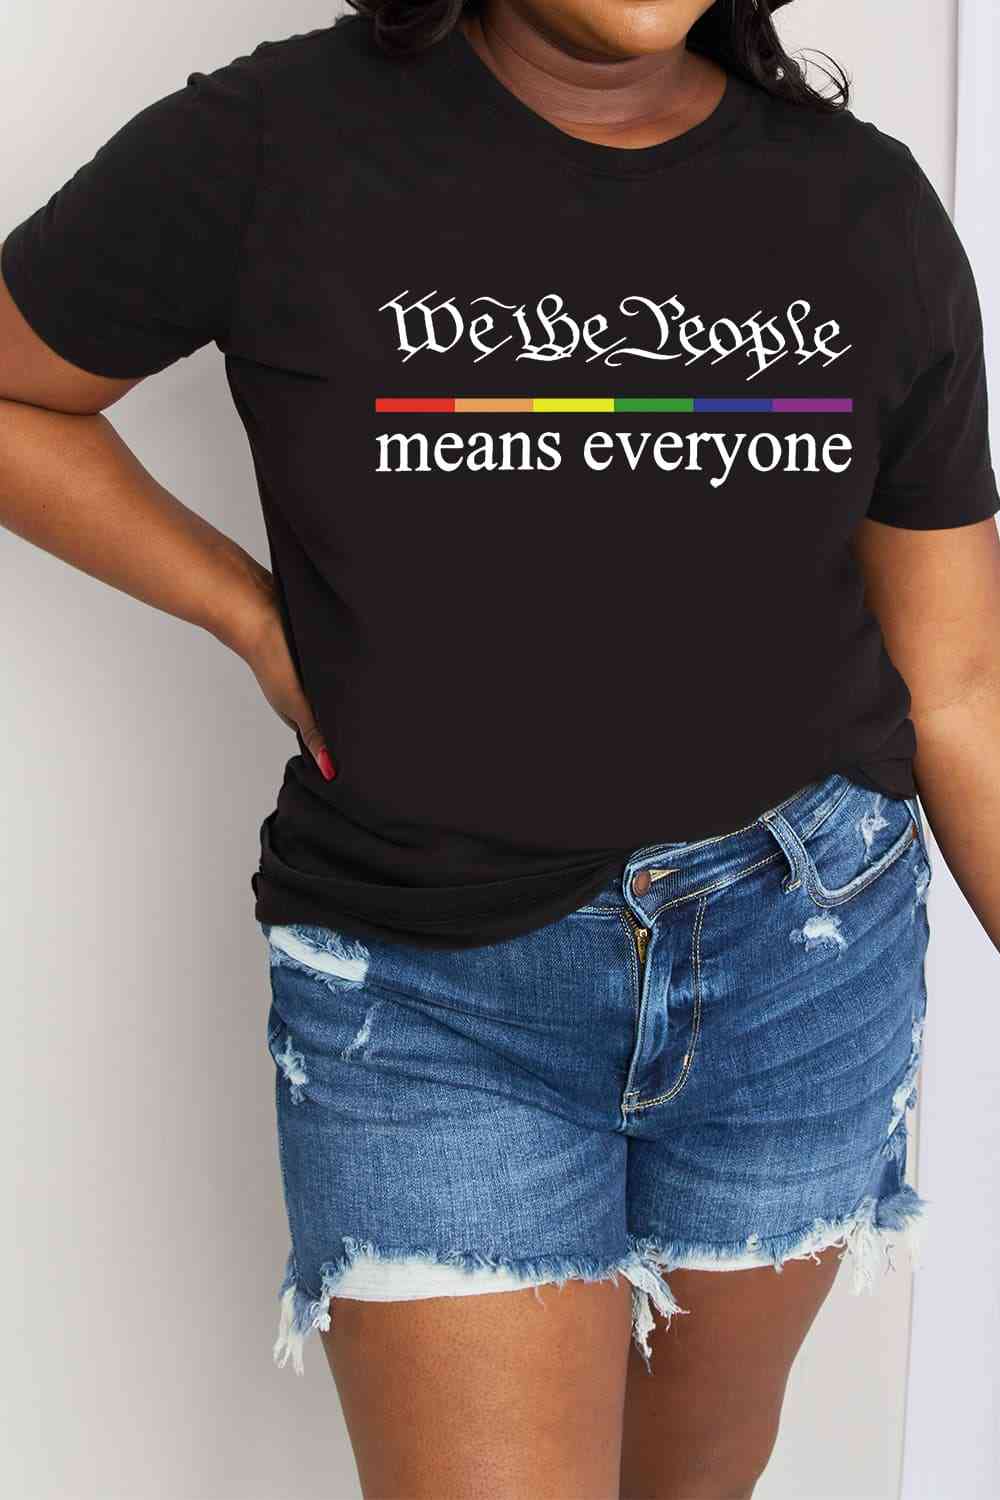 Simply Love Full Size MEANS EVERYONE Graphic Cotton Tee Graphic Tees JT's Designer Fashion